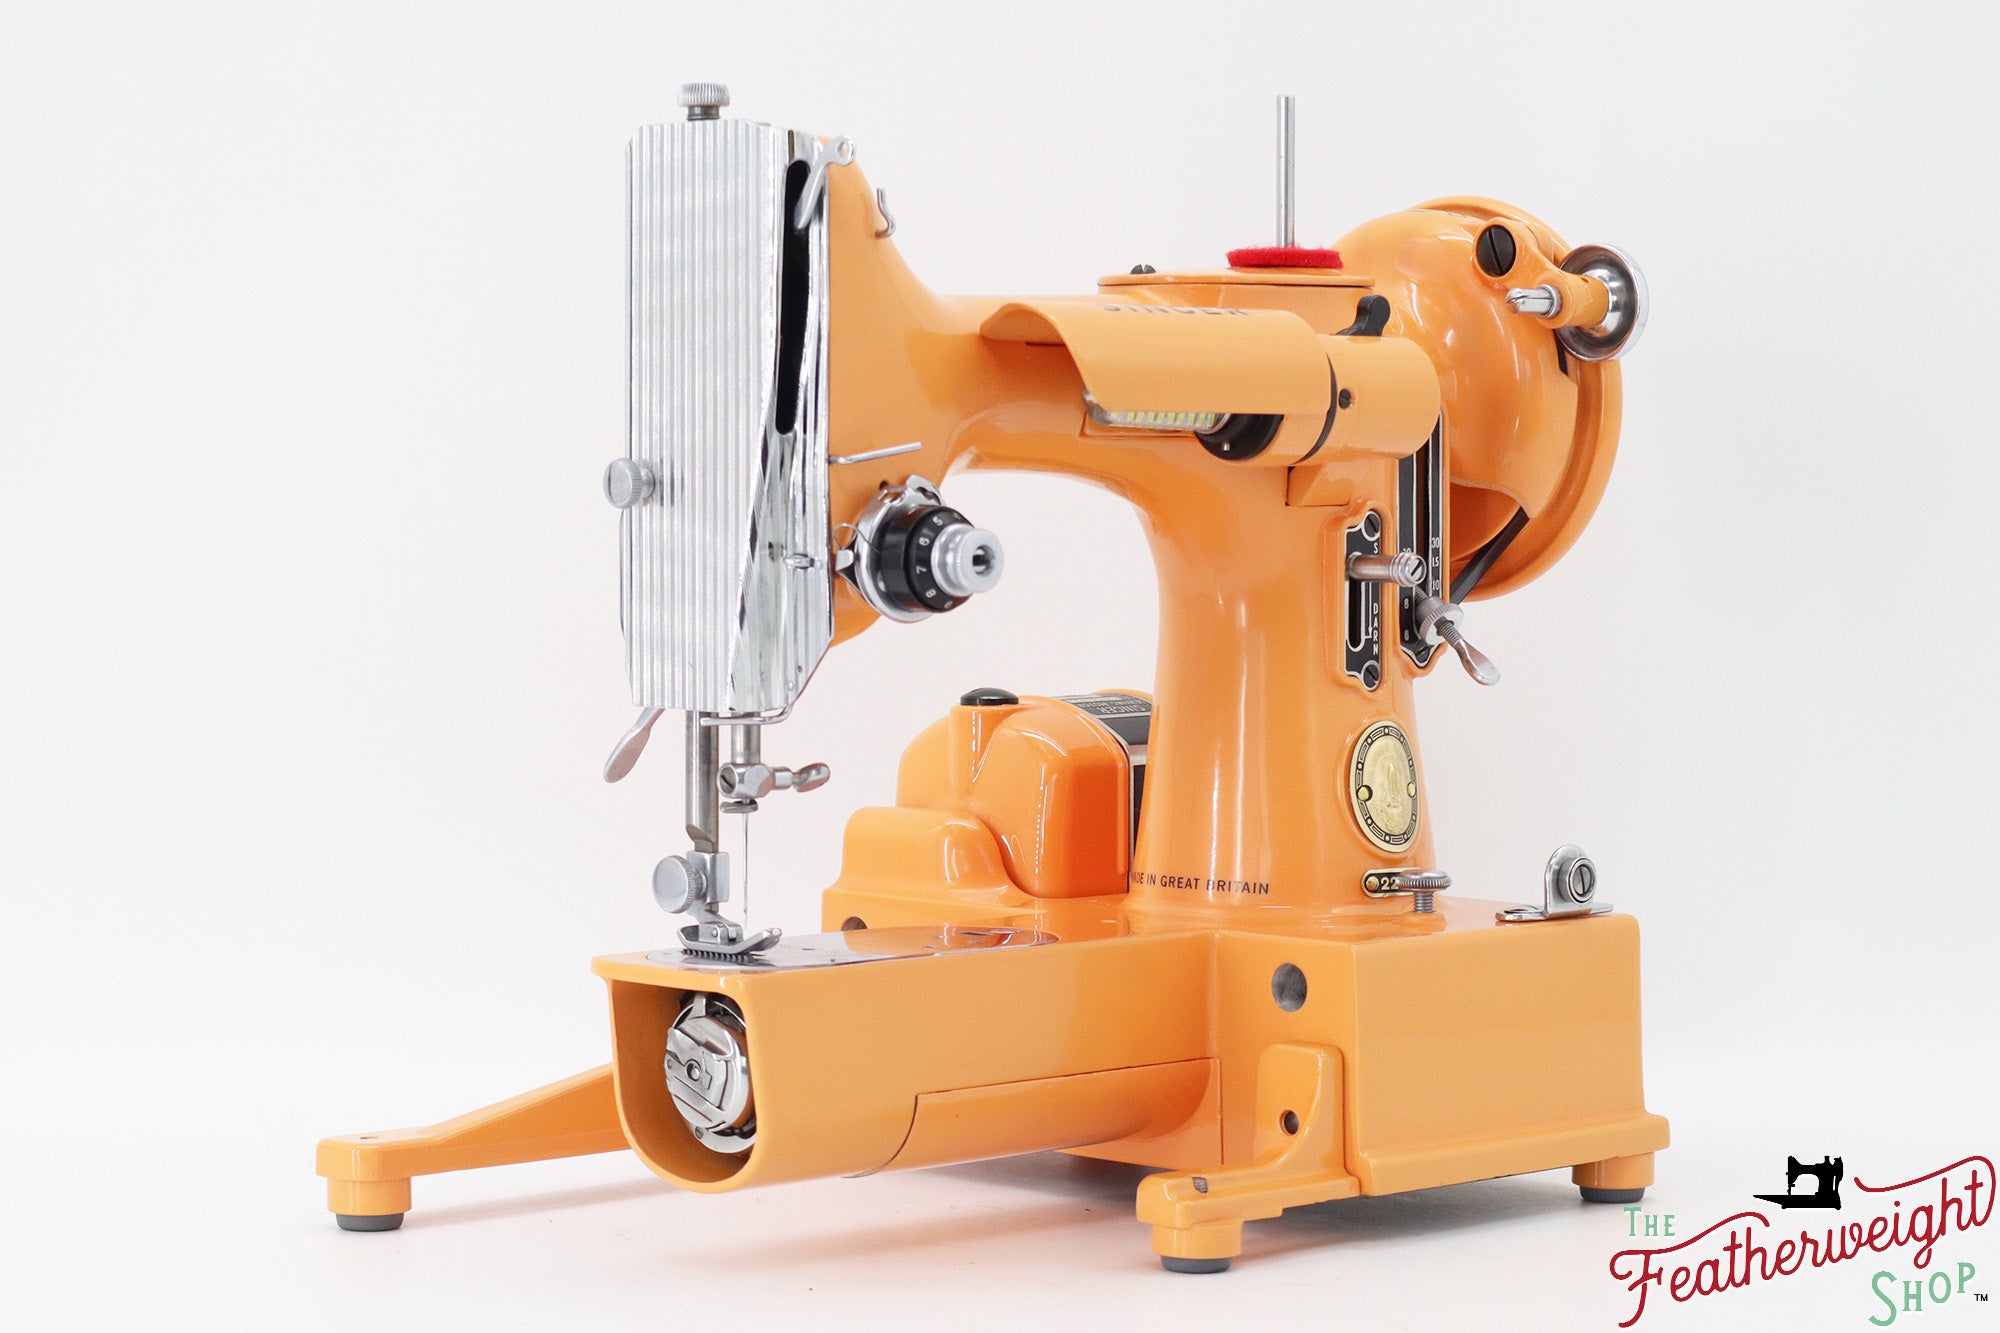 How Does The Featherweight Compare to Other Singer Machines? – The Singer  Featherweight Shop